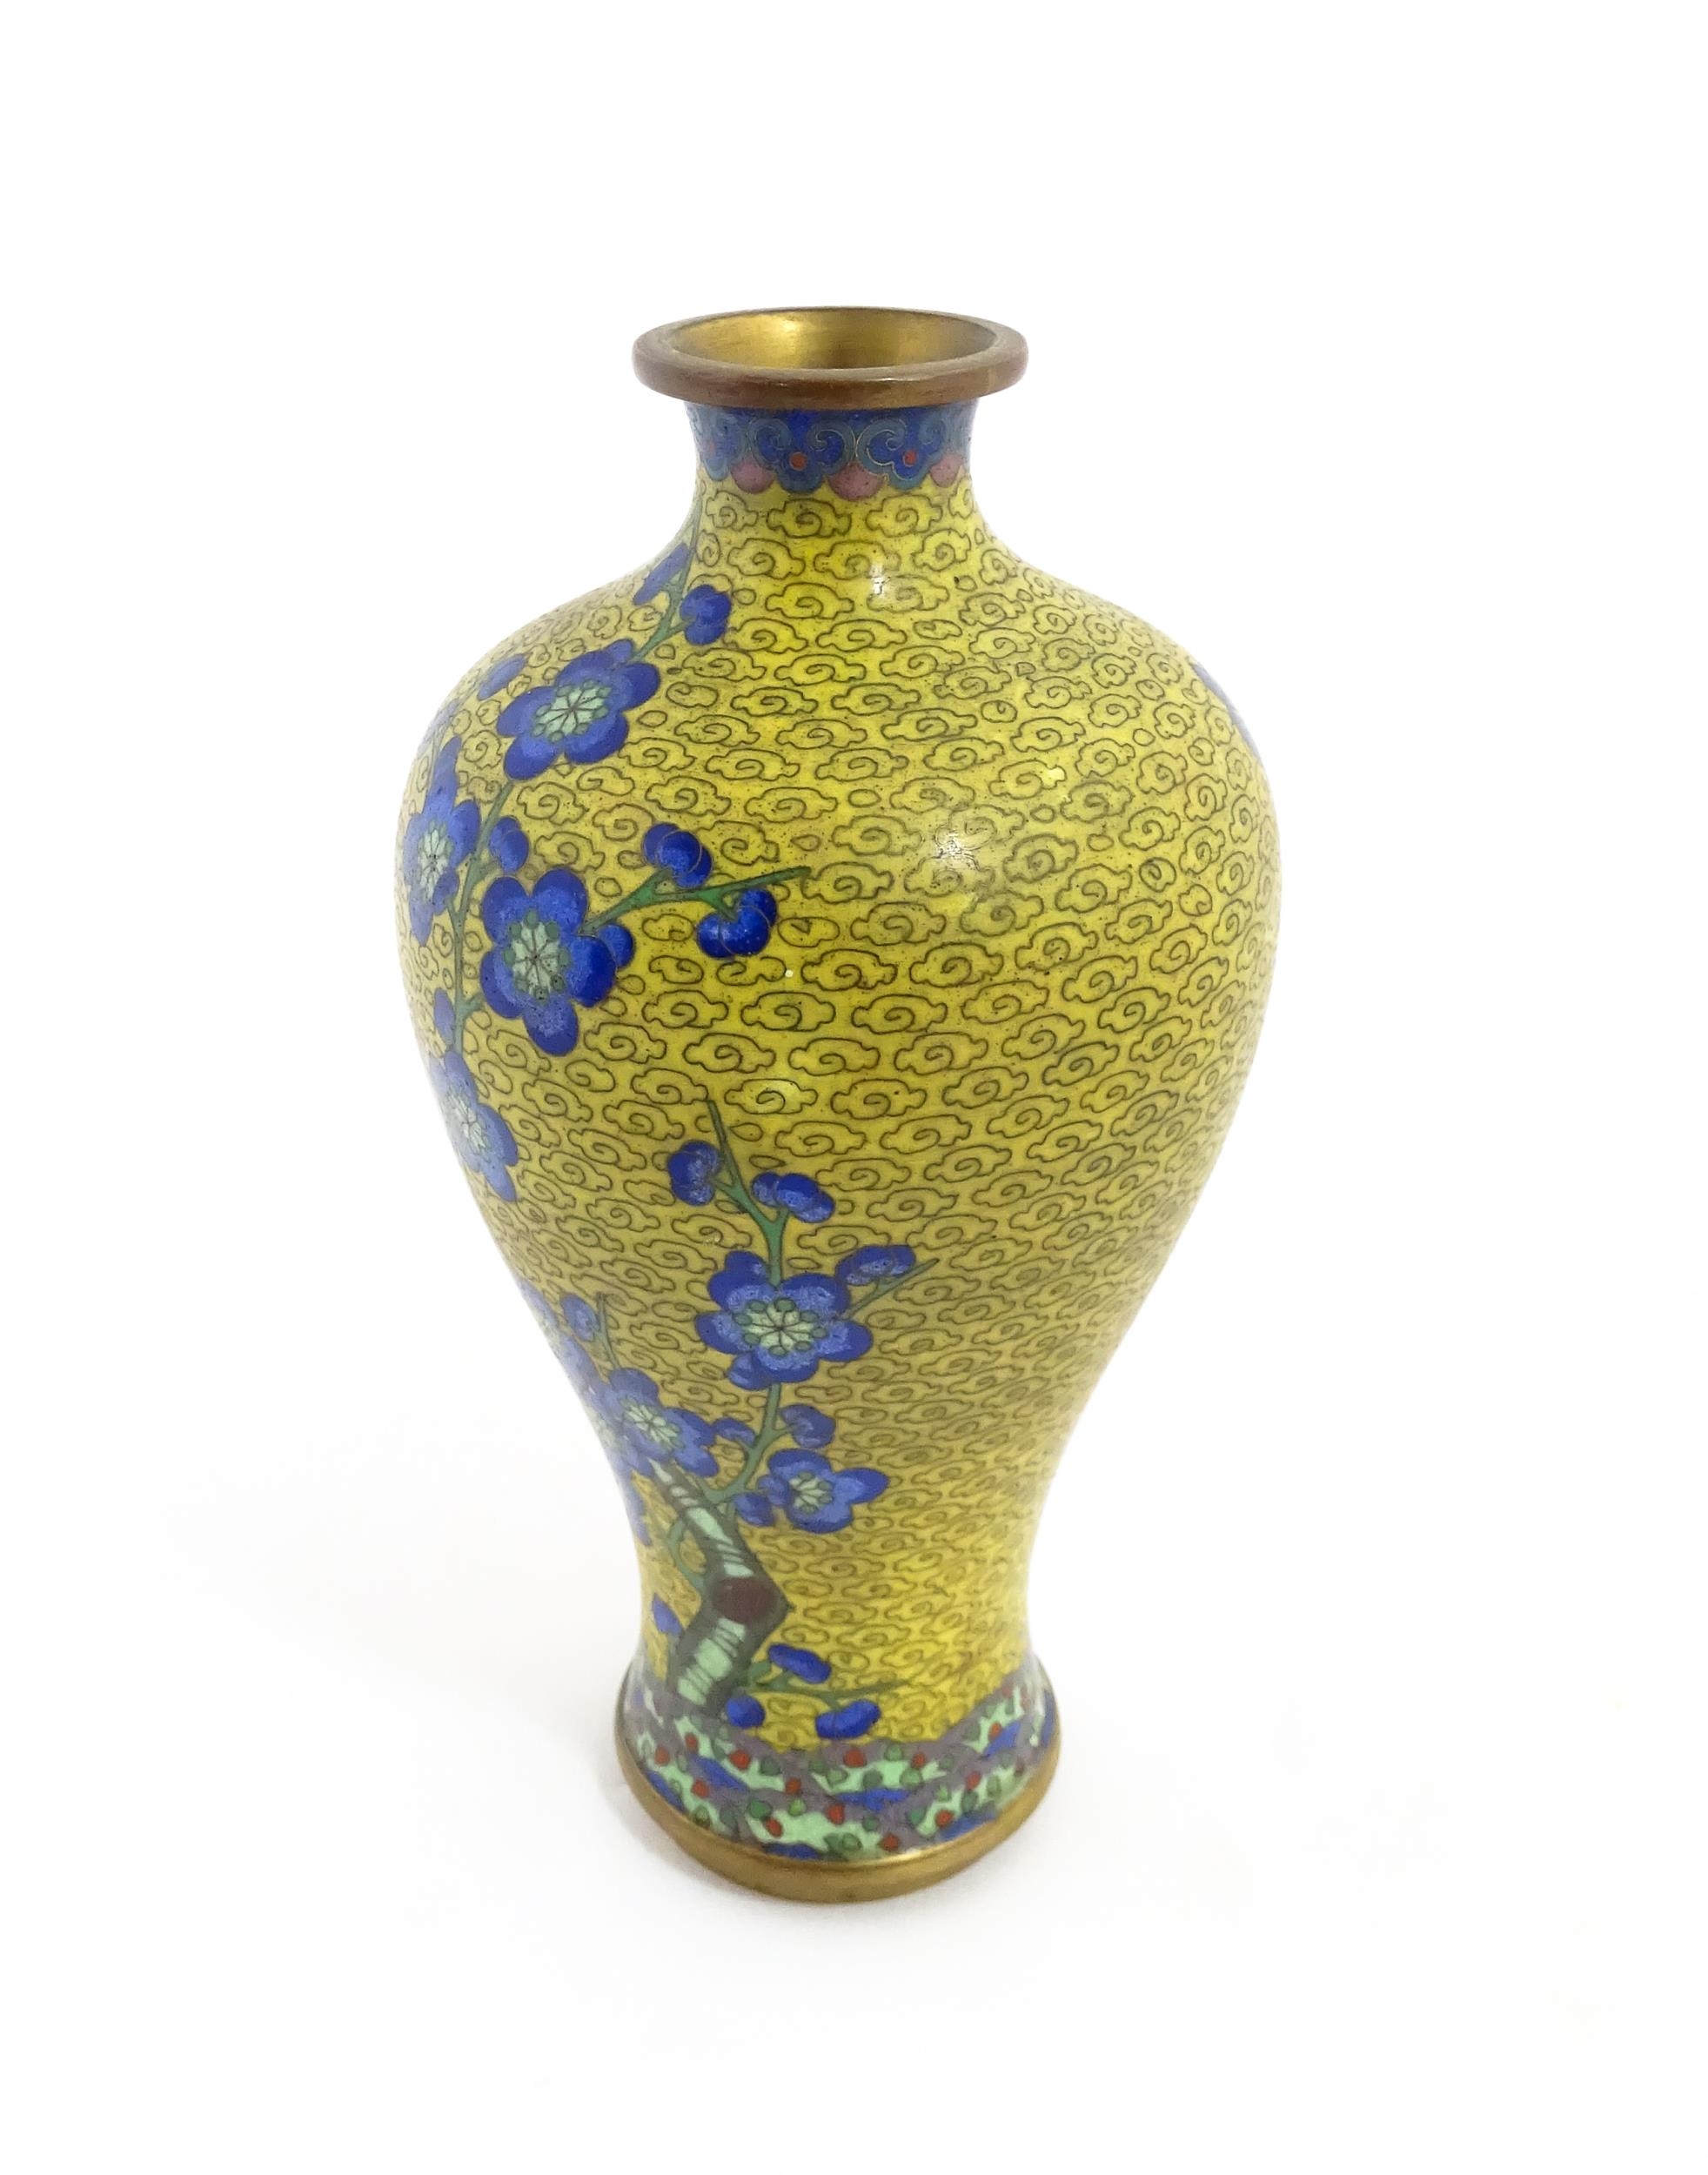 A Chinese cloisonne vase with a yellow ground decorated with blue prunus flowers / blossom. - Image 3 of 7